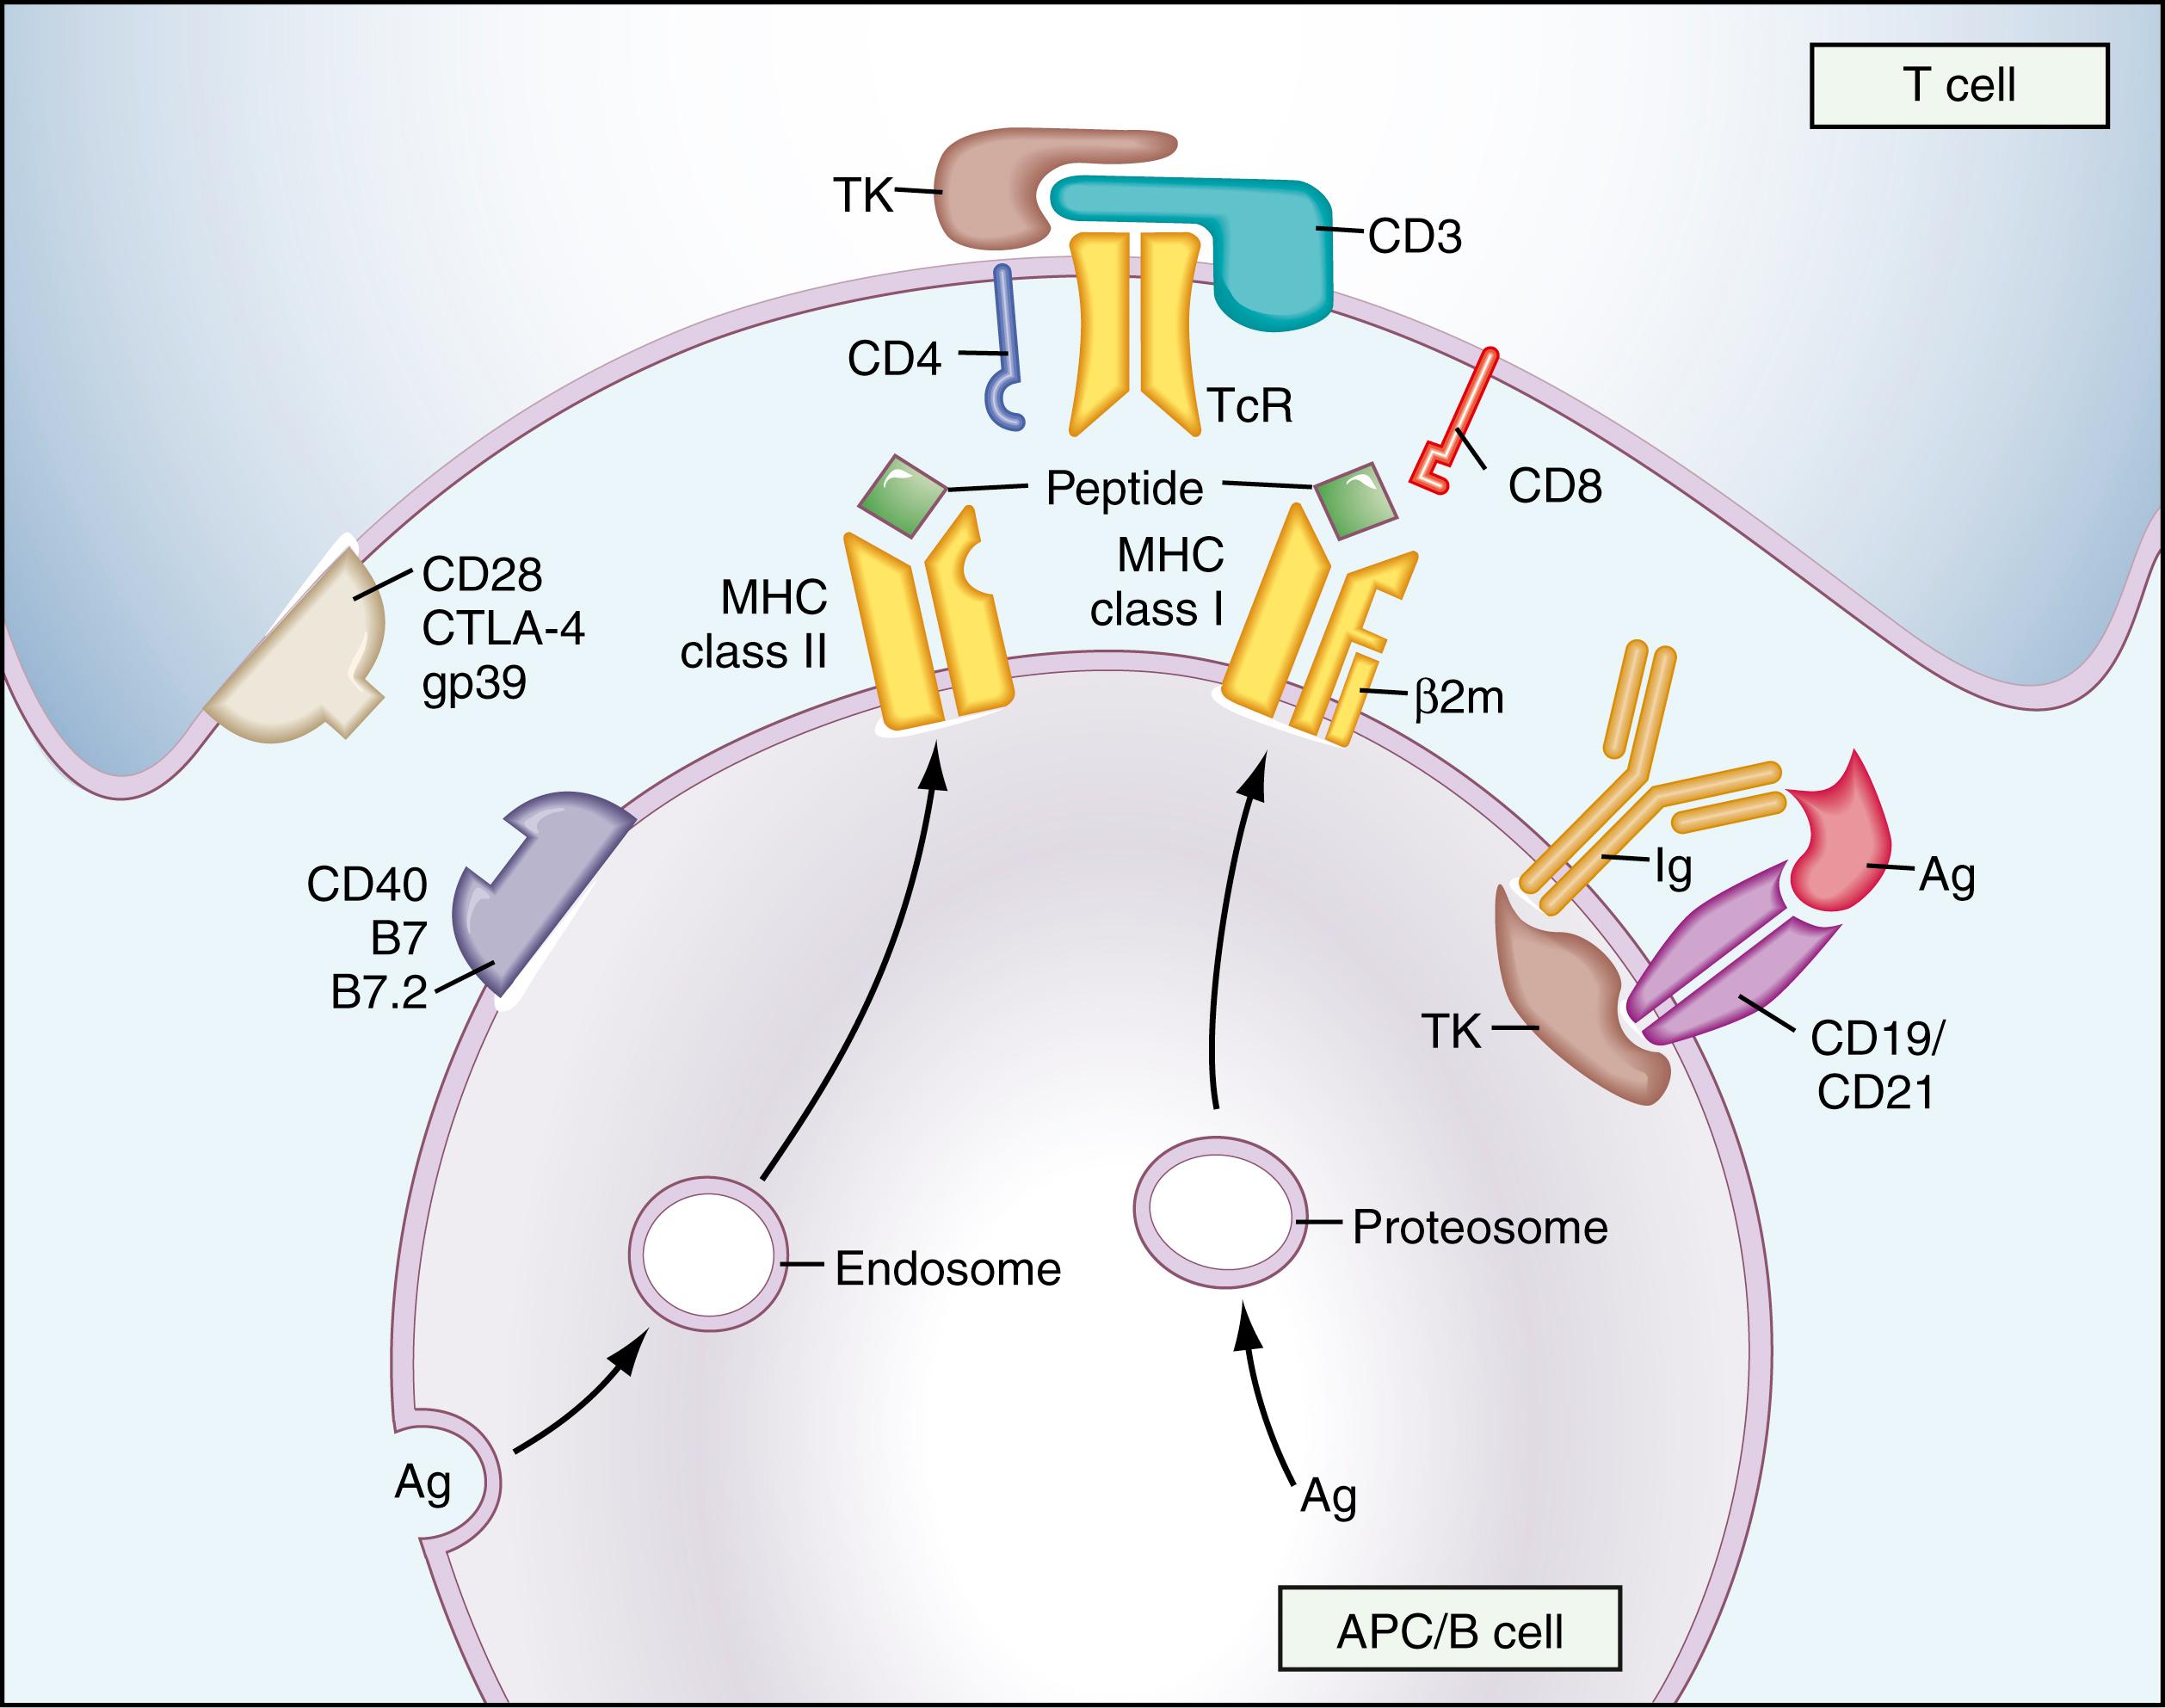 Figure 44.1, Cellular interactions in the immune system. Antigen-presenting cells (APCs) process external or internal antigens (Ag) and present antigen peptide fragments, in association with a major histocompatibility complex (MHC) molecule, to T cells. On the T cell, a specific antigen receptor (TcR), along with the coreceptor CD4 or CD8 molecule, recognizes the antigen–MHC complex. Cellular activation proceeds through the CD3 complex and activation of tyrosine kinases (TKs). The B-cell receptor is composed of membrane-bound immunoglobulin (Ig) complexed to associated membrane proteins, and the CD19/21 coreceptor. On antigen recognition, cellular TKs are also activated. Costimulatory activation of T cells or B cells is provided by cellular receptors binding their ligands (the ligand B7 or B7.2 for T-cell costimulation through CD28 and CTLA-4 molecules, and the gp39 ligand for the B cell CD40 molecule).